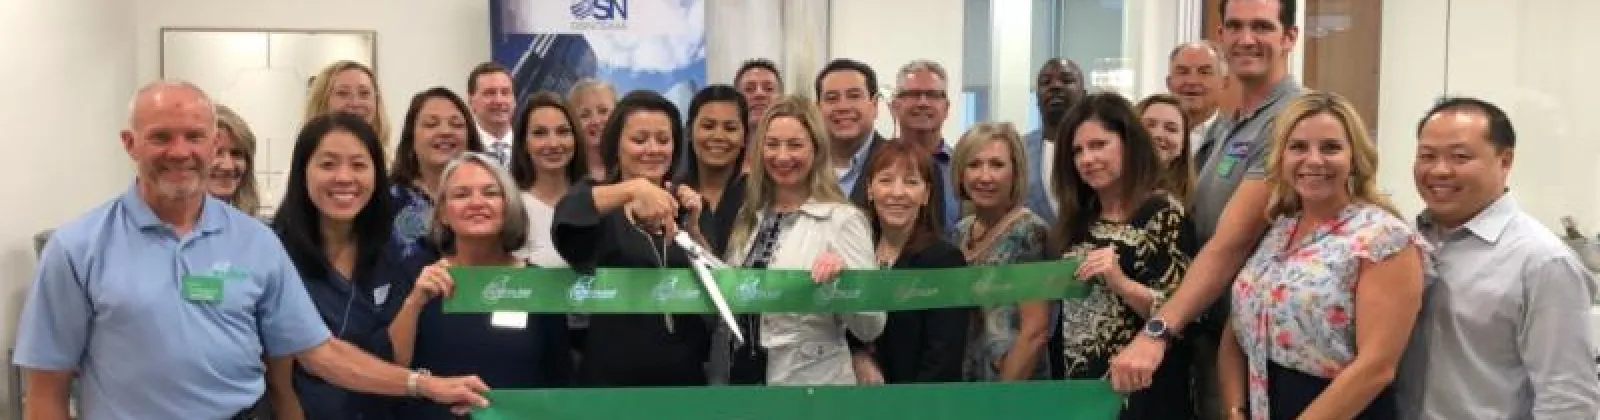 OS National Opens Southlake, Texas Office to Serve the Real Estate Community